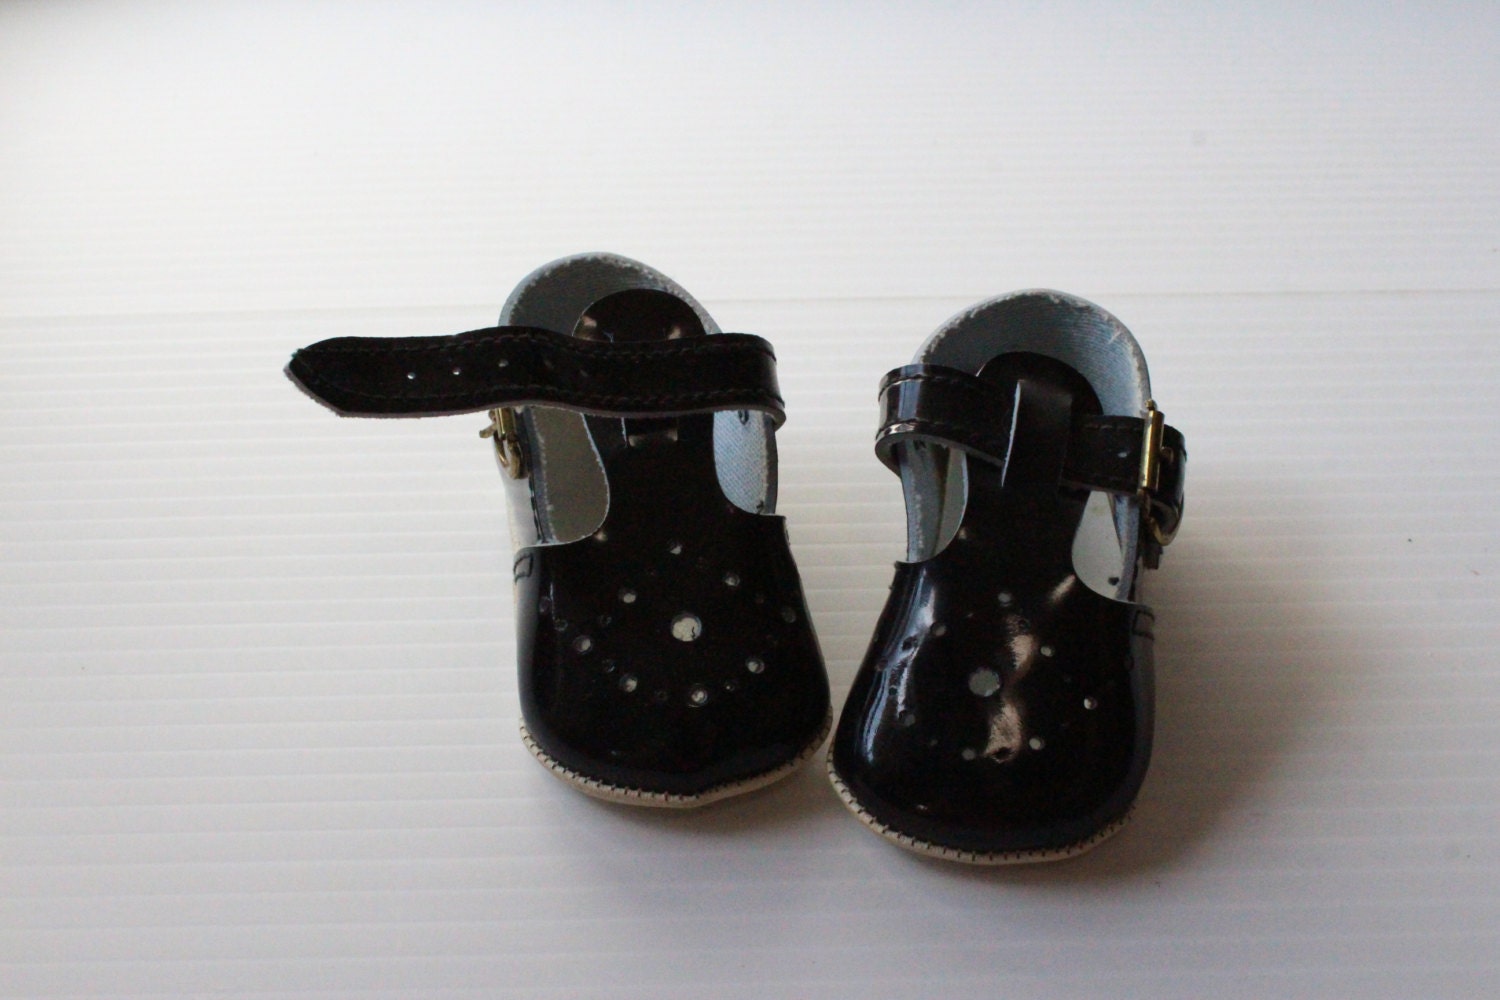 BABY DOLL SHOES 3.75 doll shoes Black Patent Leather